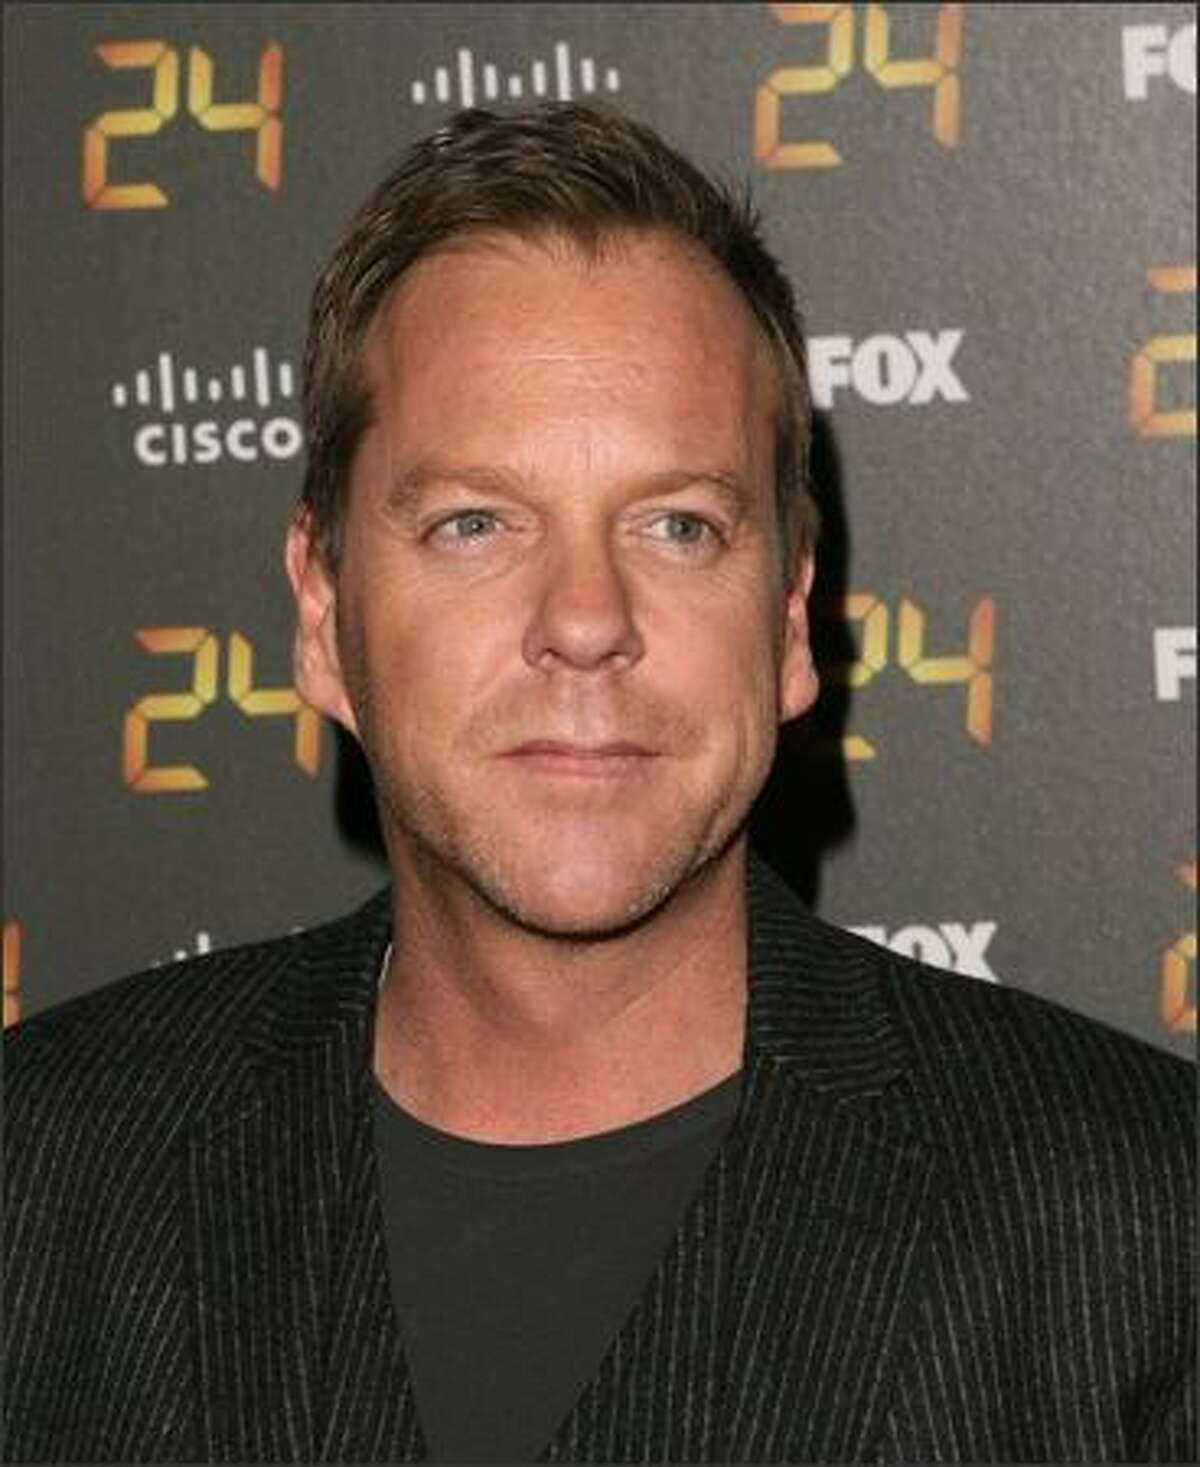 Actor Kiefer Sutherland arrives at the "24" 150th Episode and Season 7 Premiere Party held at XIV on Tuesday in Los Angeles, Calif.